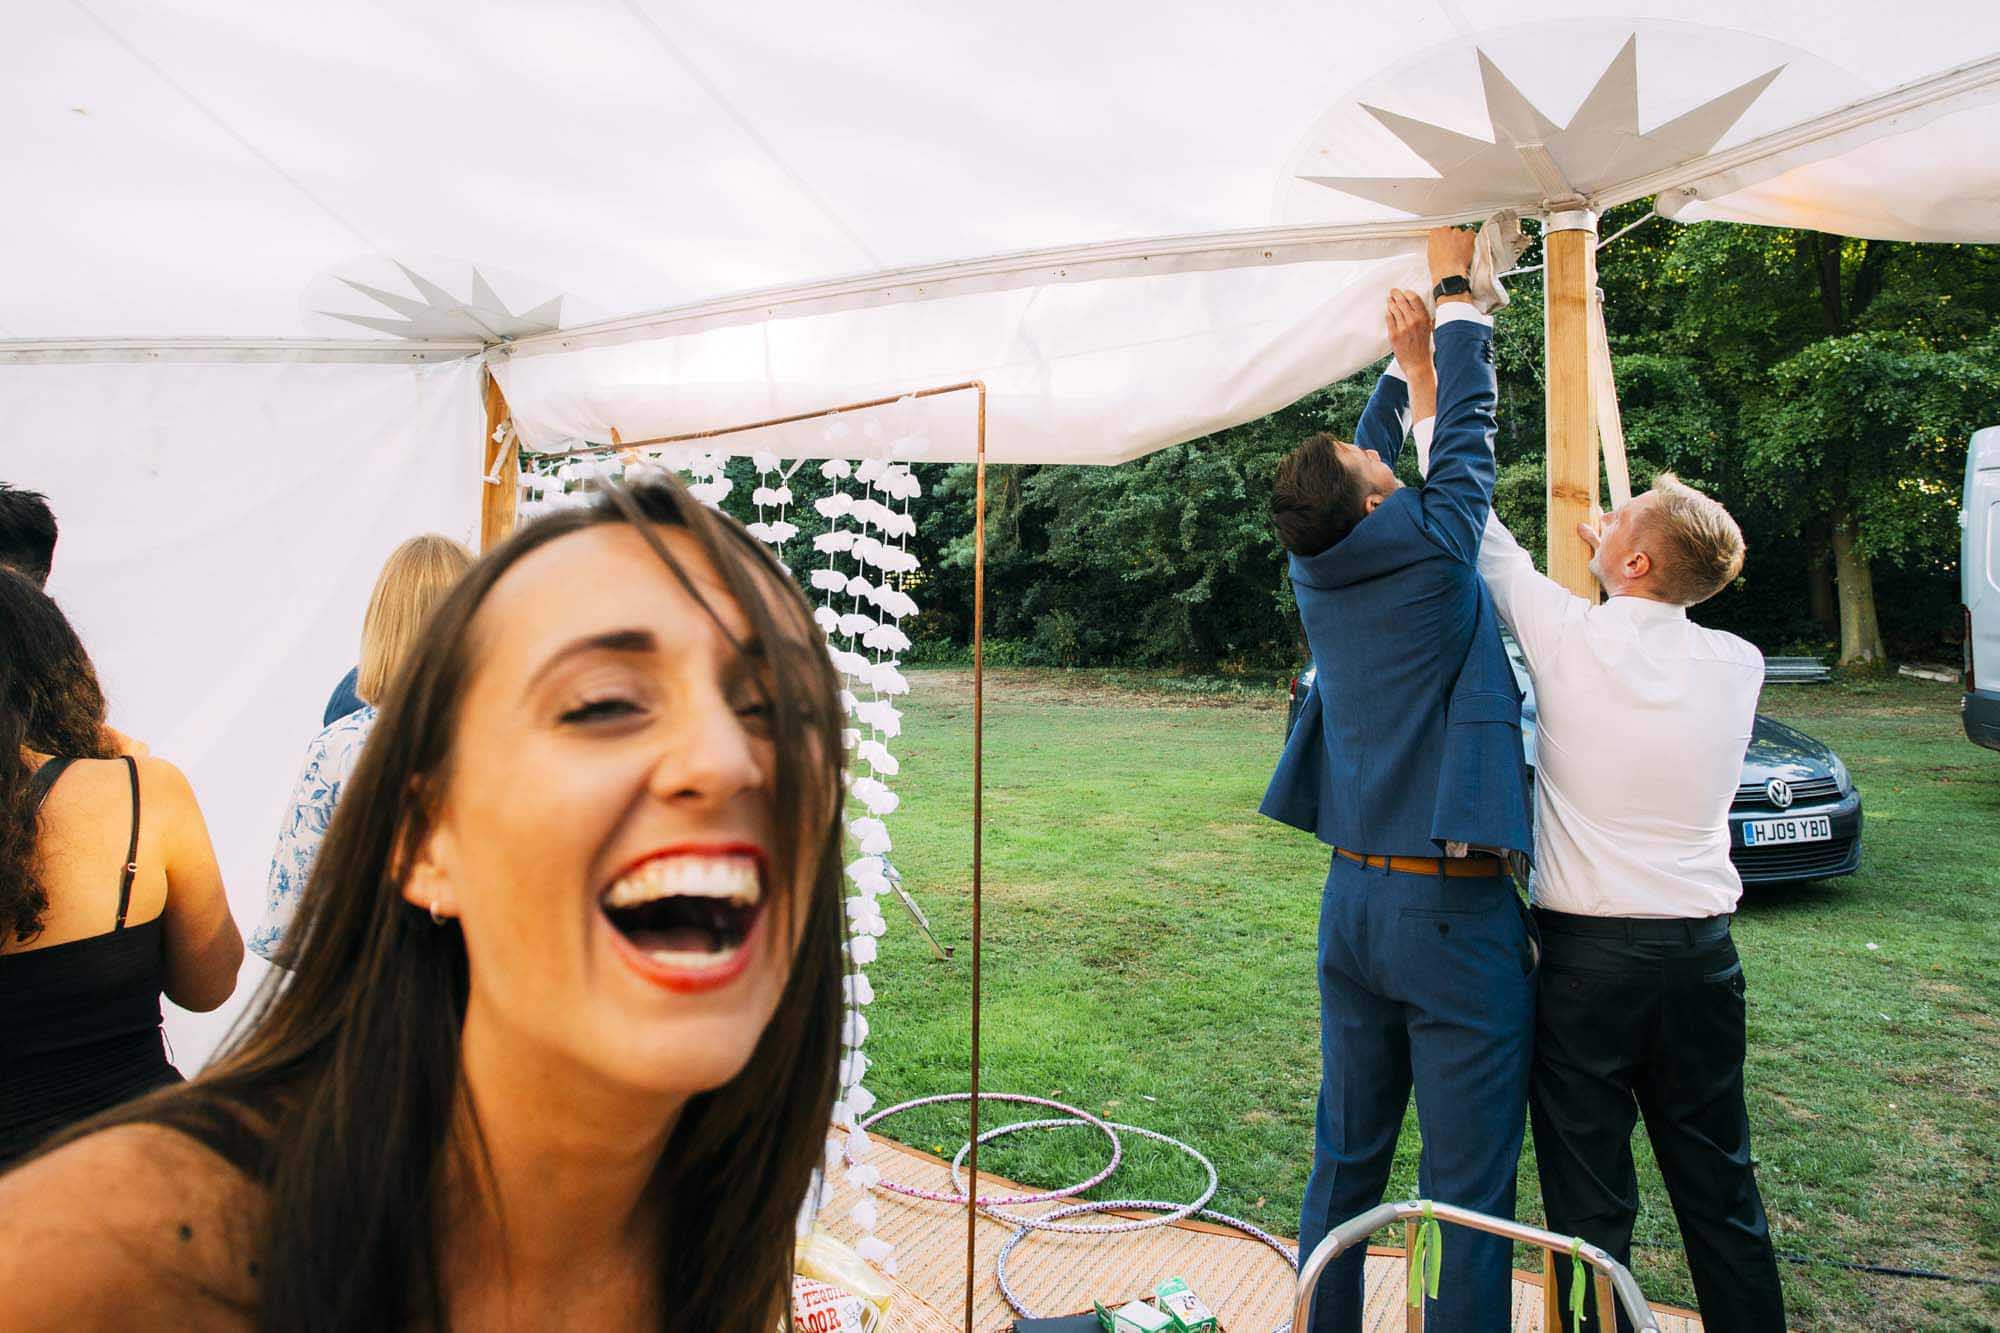 candid wedding photography of laughter